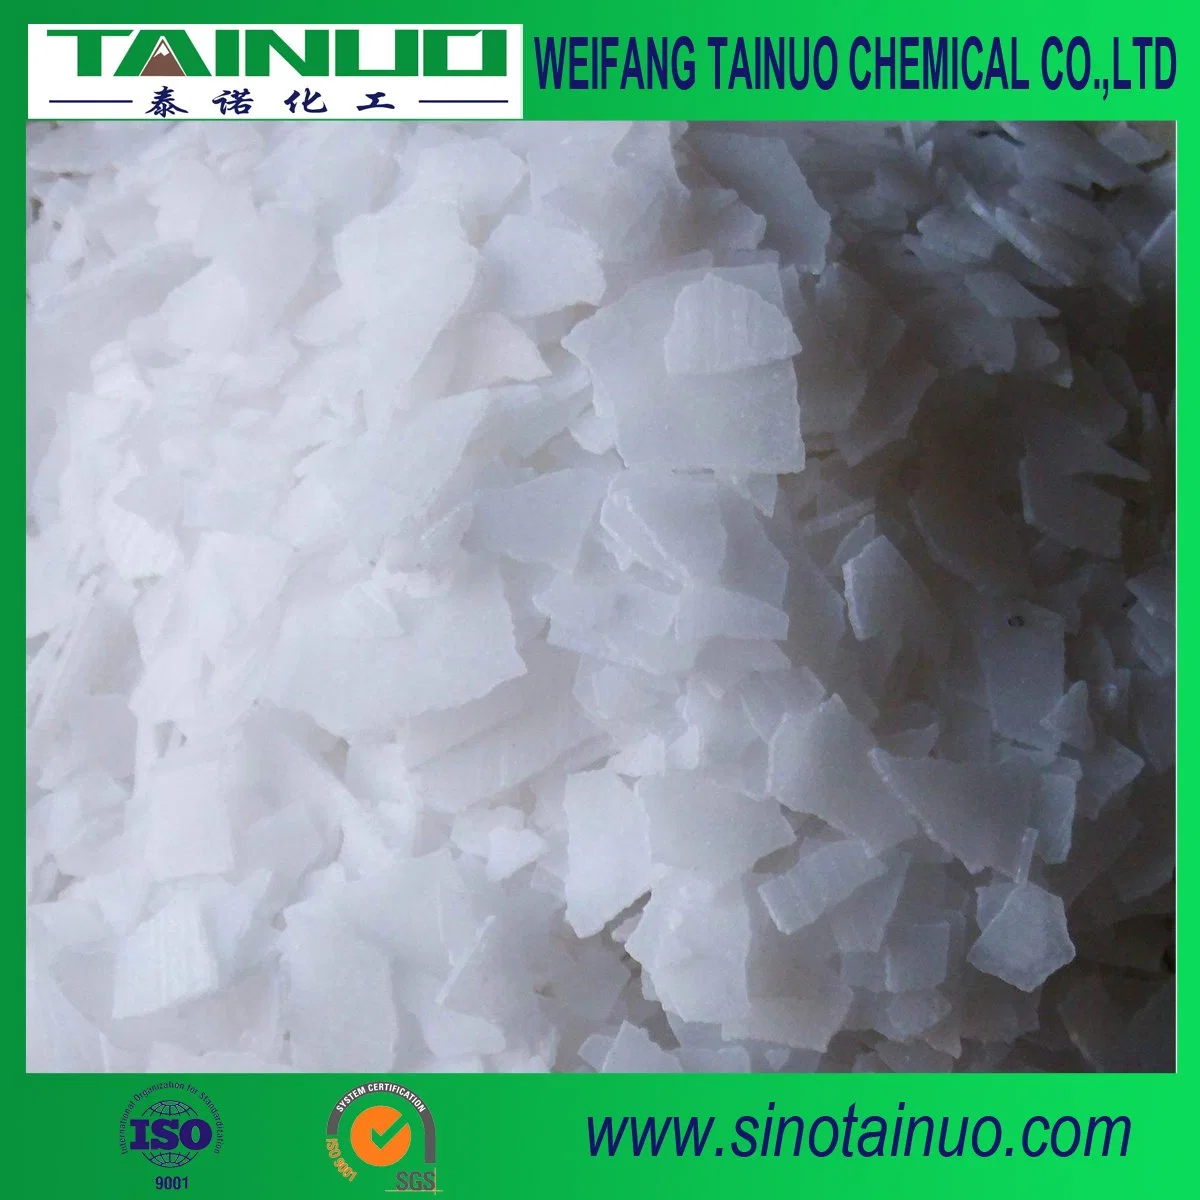 Sodium Hydroxid/Caustic Soda Flakes/Pearls for Industrial Uses